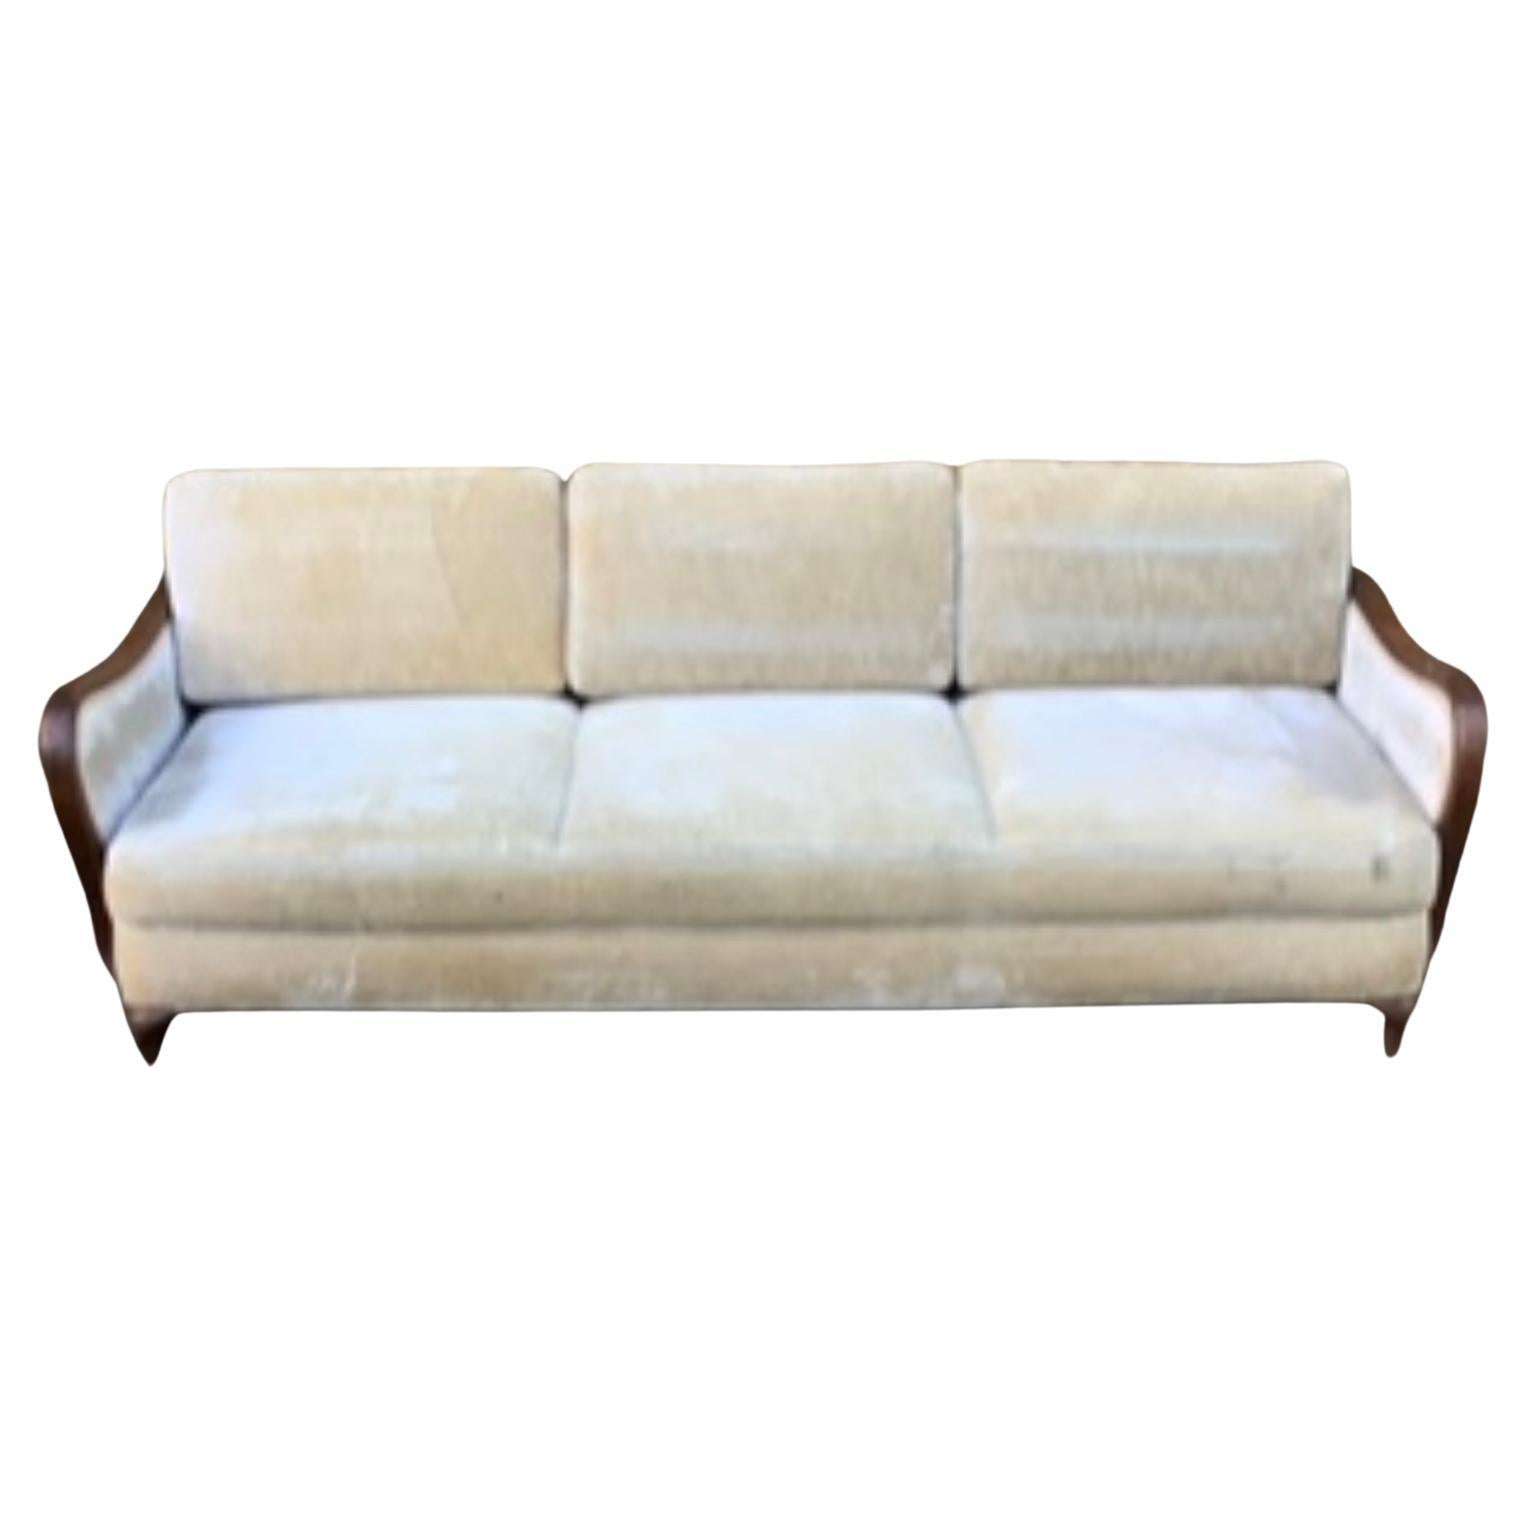 1930s, German, Sofa / Daybed